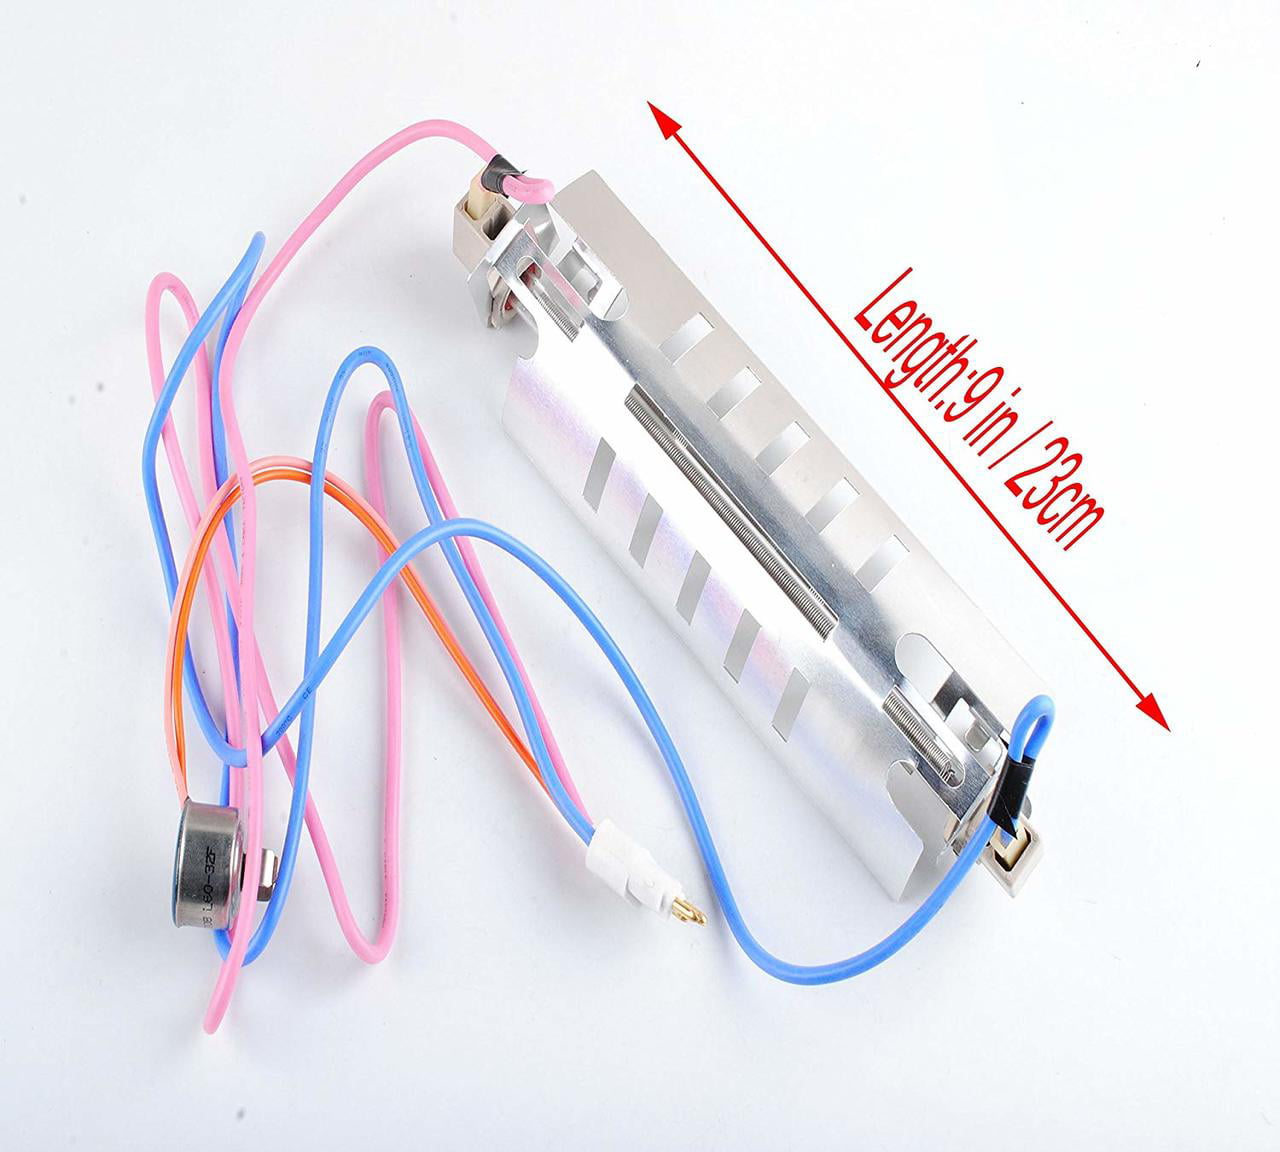 773802 AH303762 A Defrost Heater Kit Assembly Compatible with GE Refrigerator 